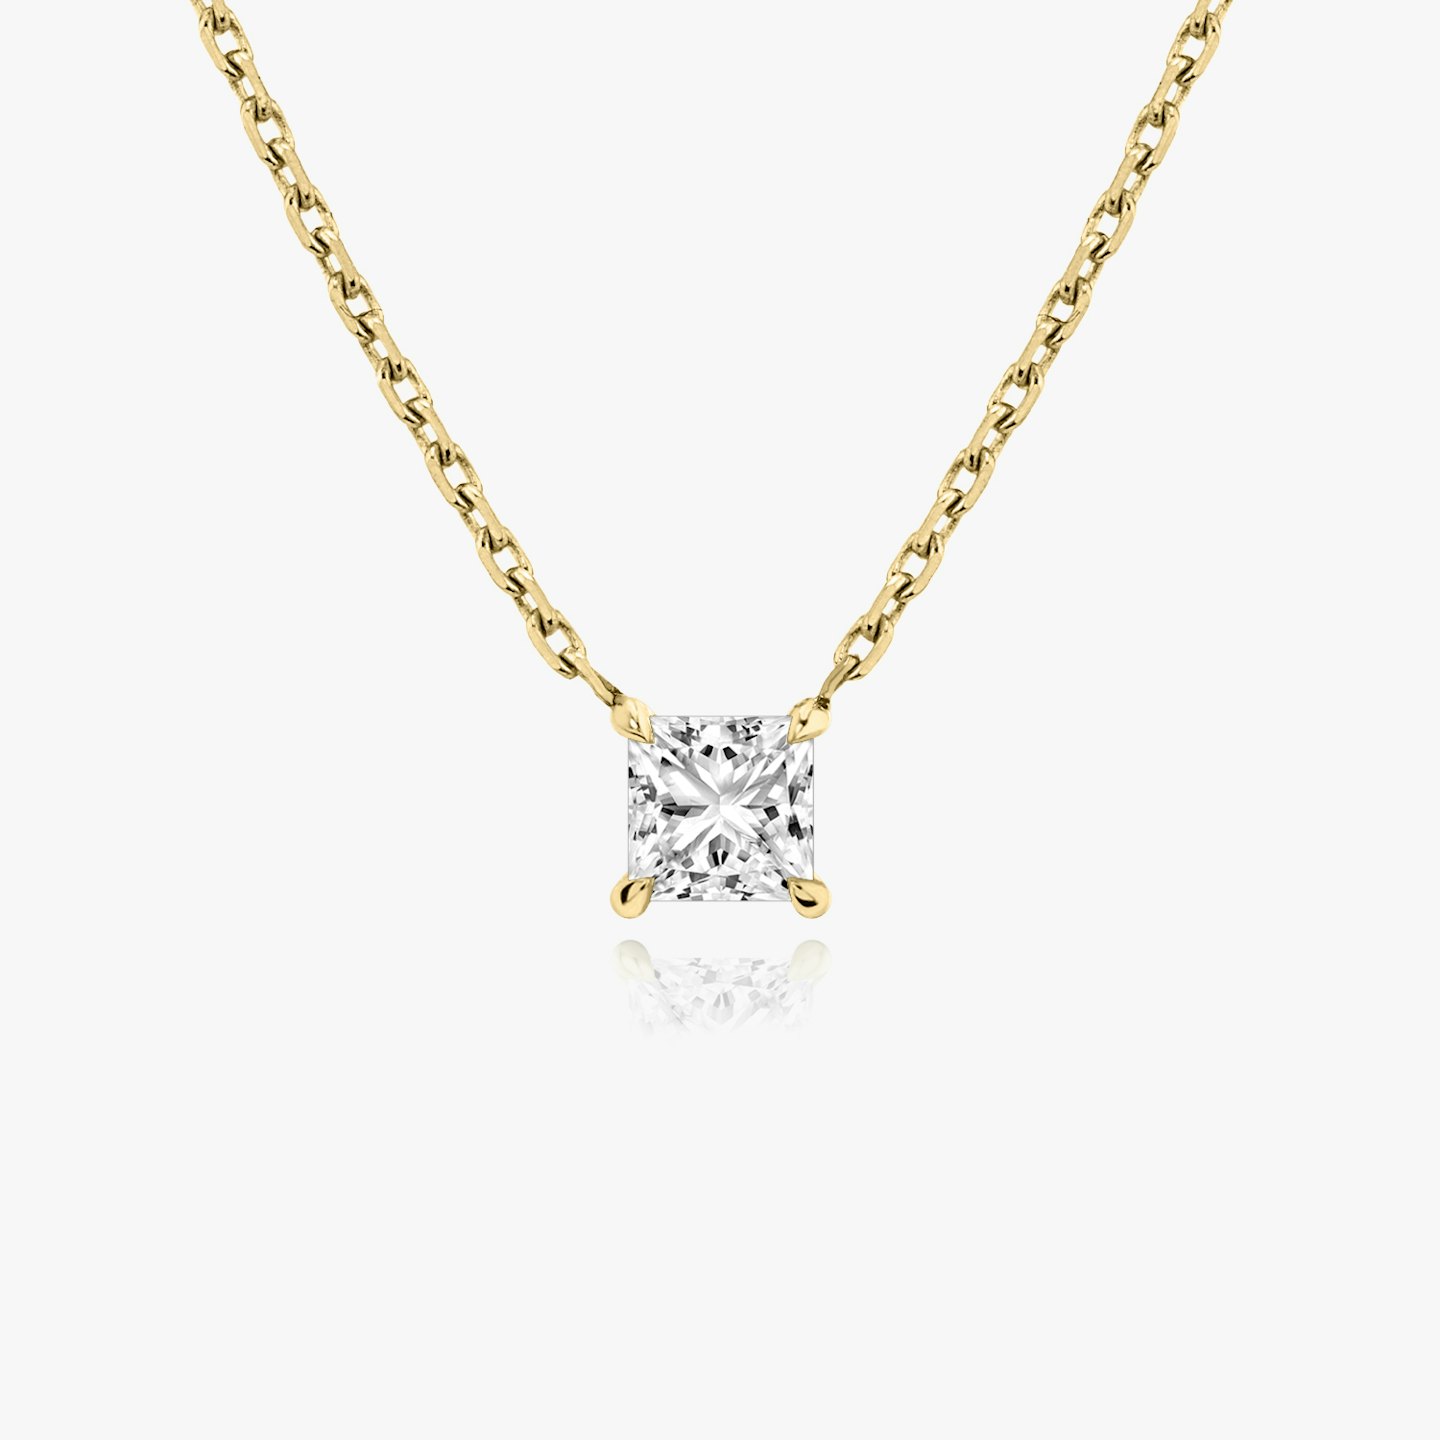 Princess cut diamond necklace in yellow gold front view